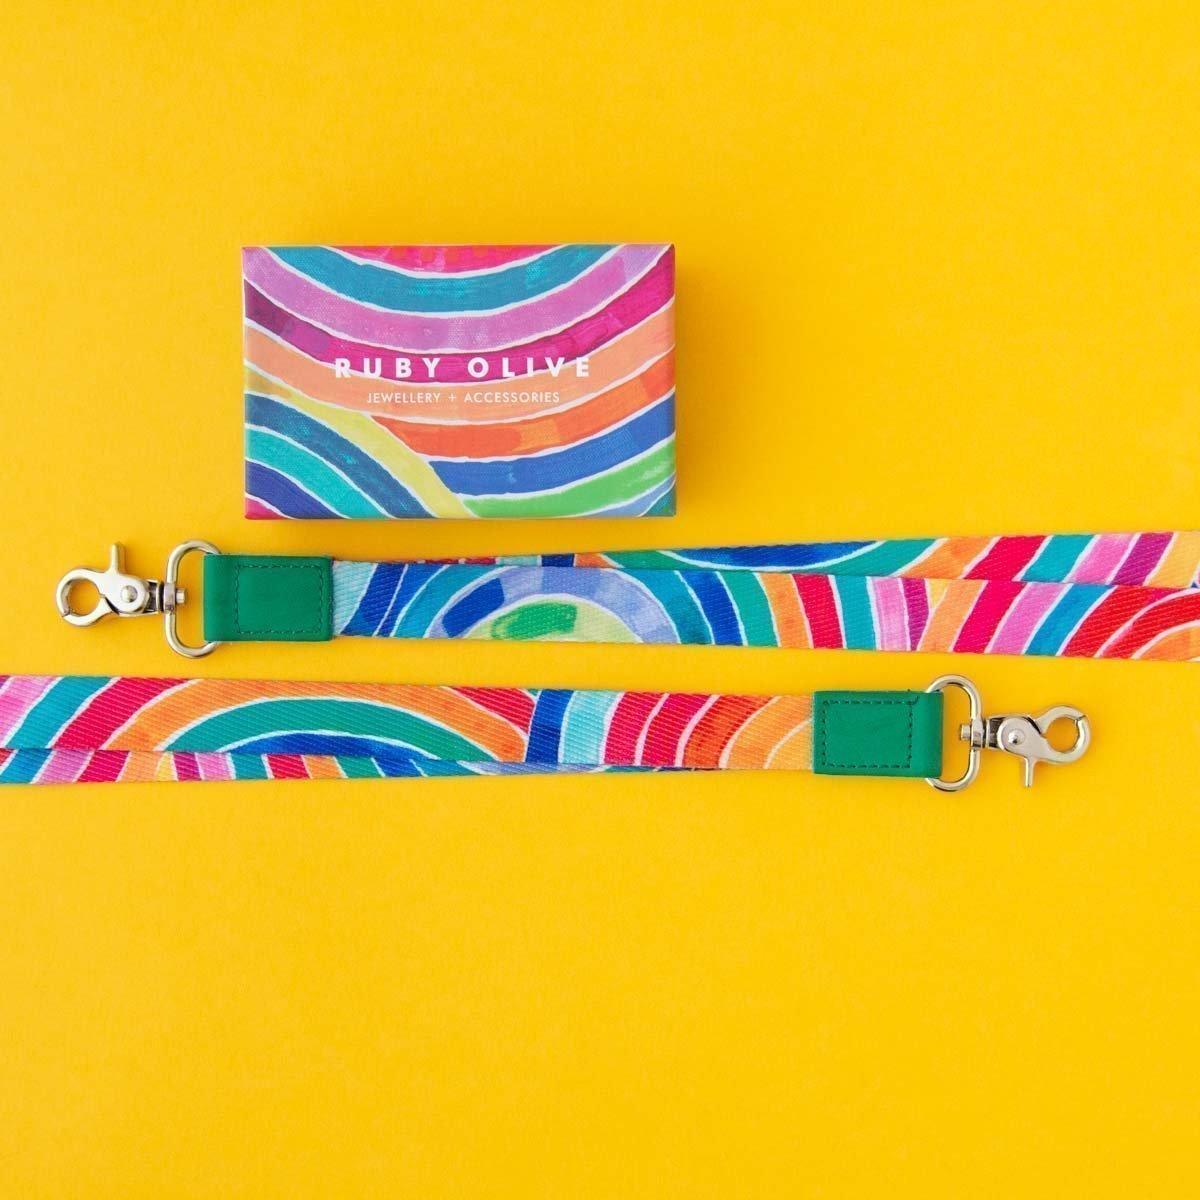 RUBY OLIVE x Lordy Dordie Rainbow Lanyard - GREEN (With Safety Clasp) - Lordy Dordie Art